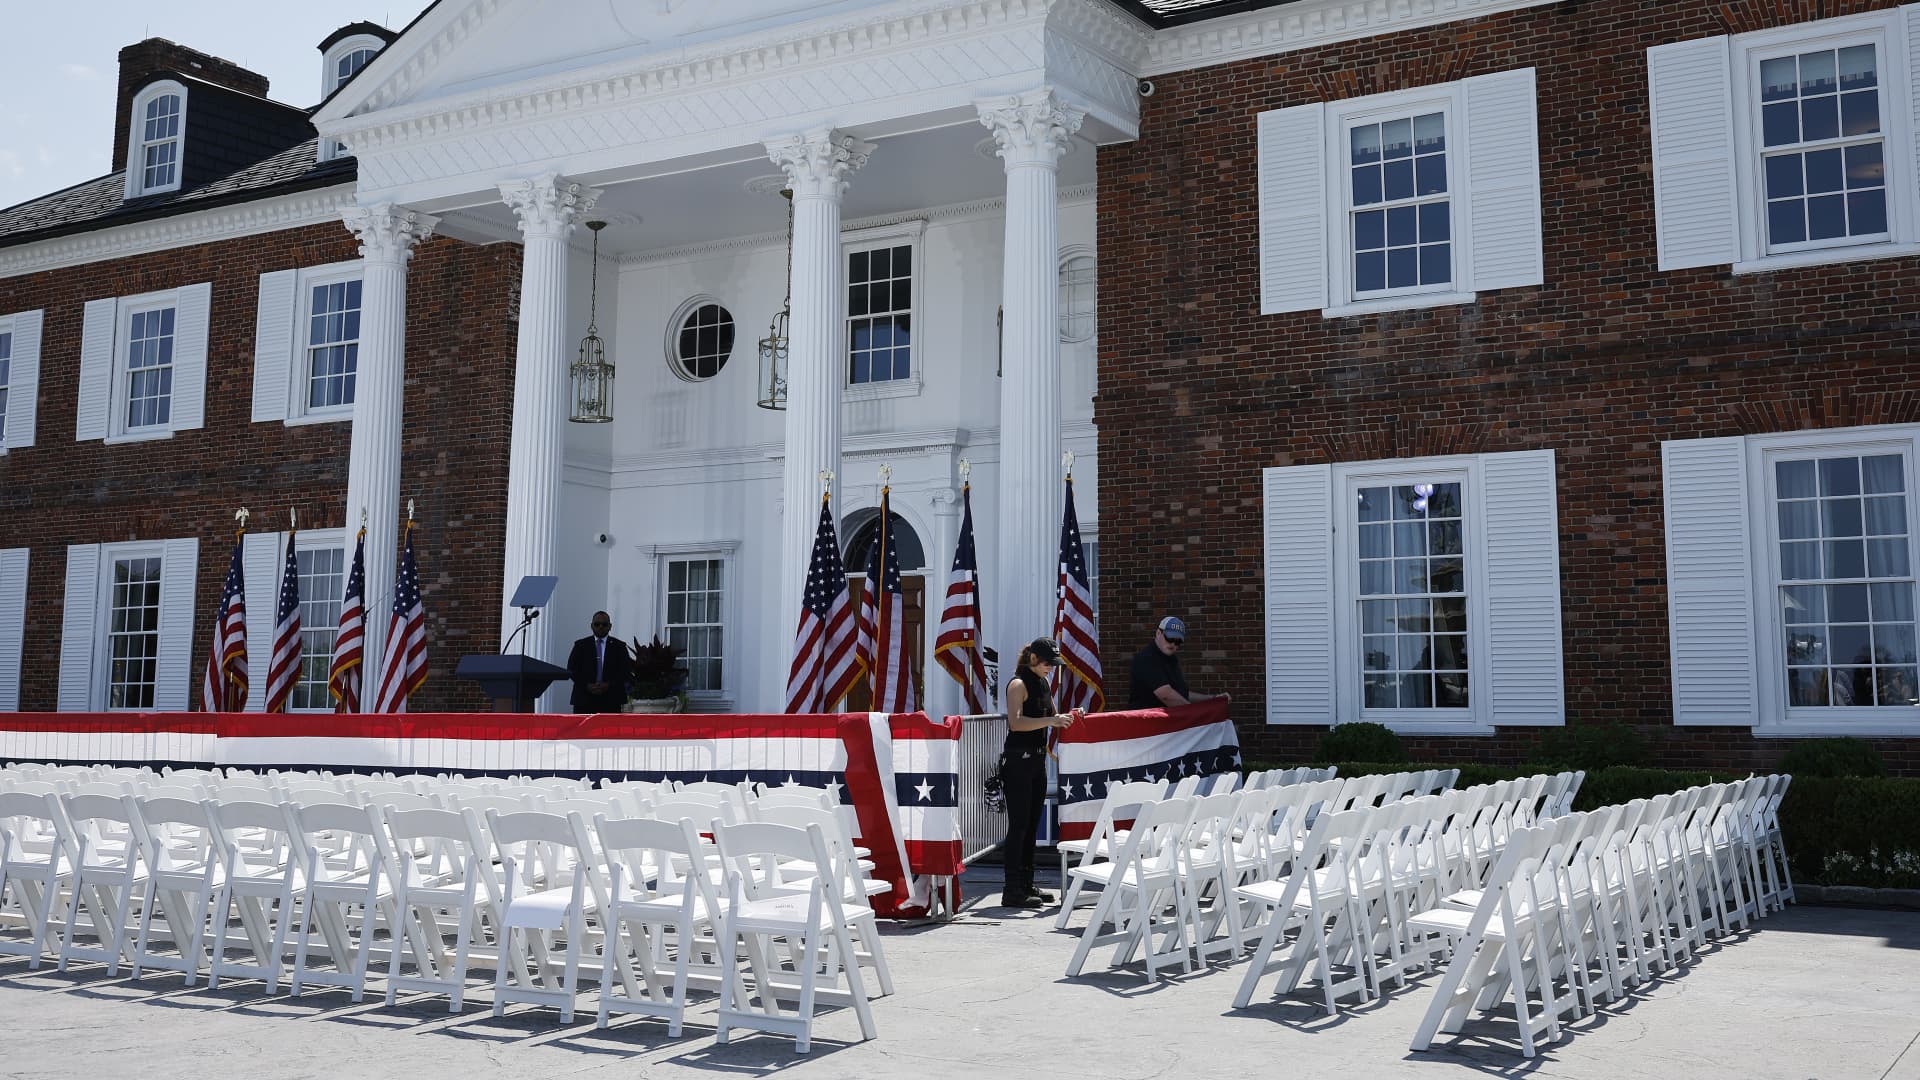 Preparations continue in front of the club house at the Trump National Golf Club hours ahead of a speech by former U.S. President Donald Trump on June 13, 2023 in Bedminster, New Jersey. 